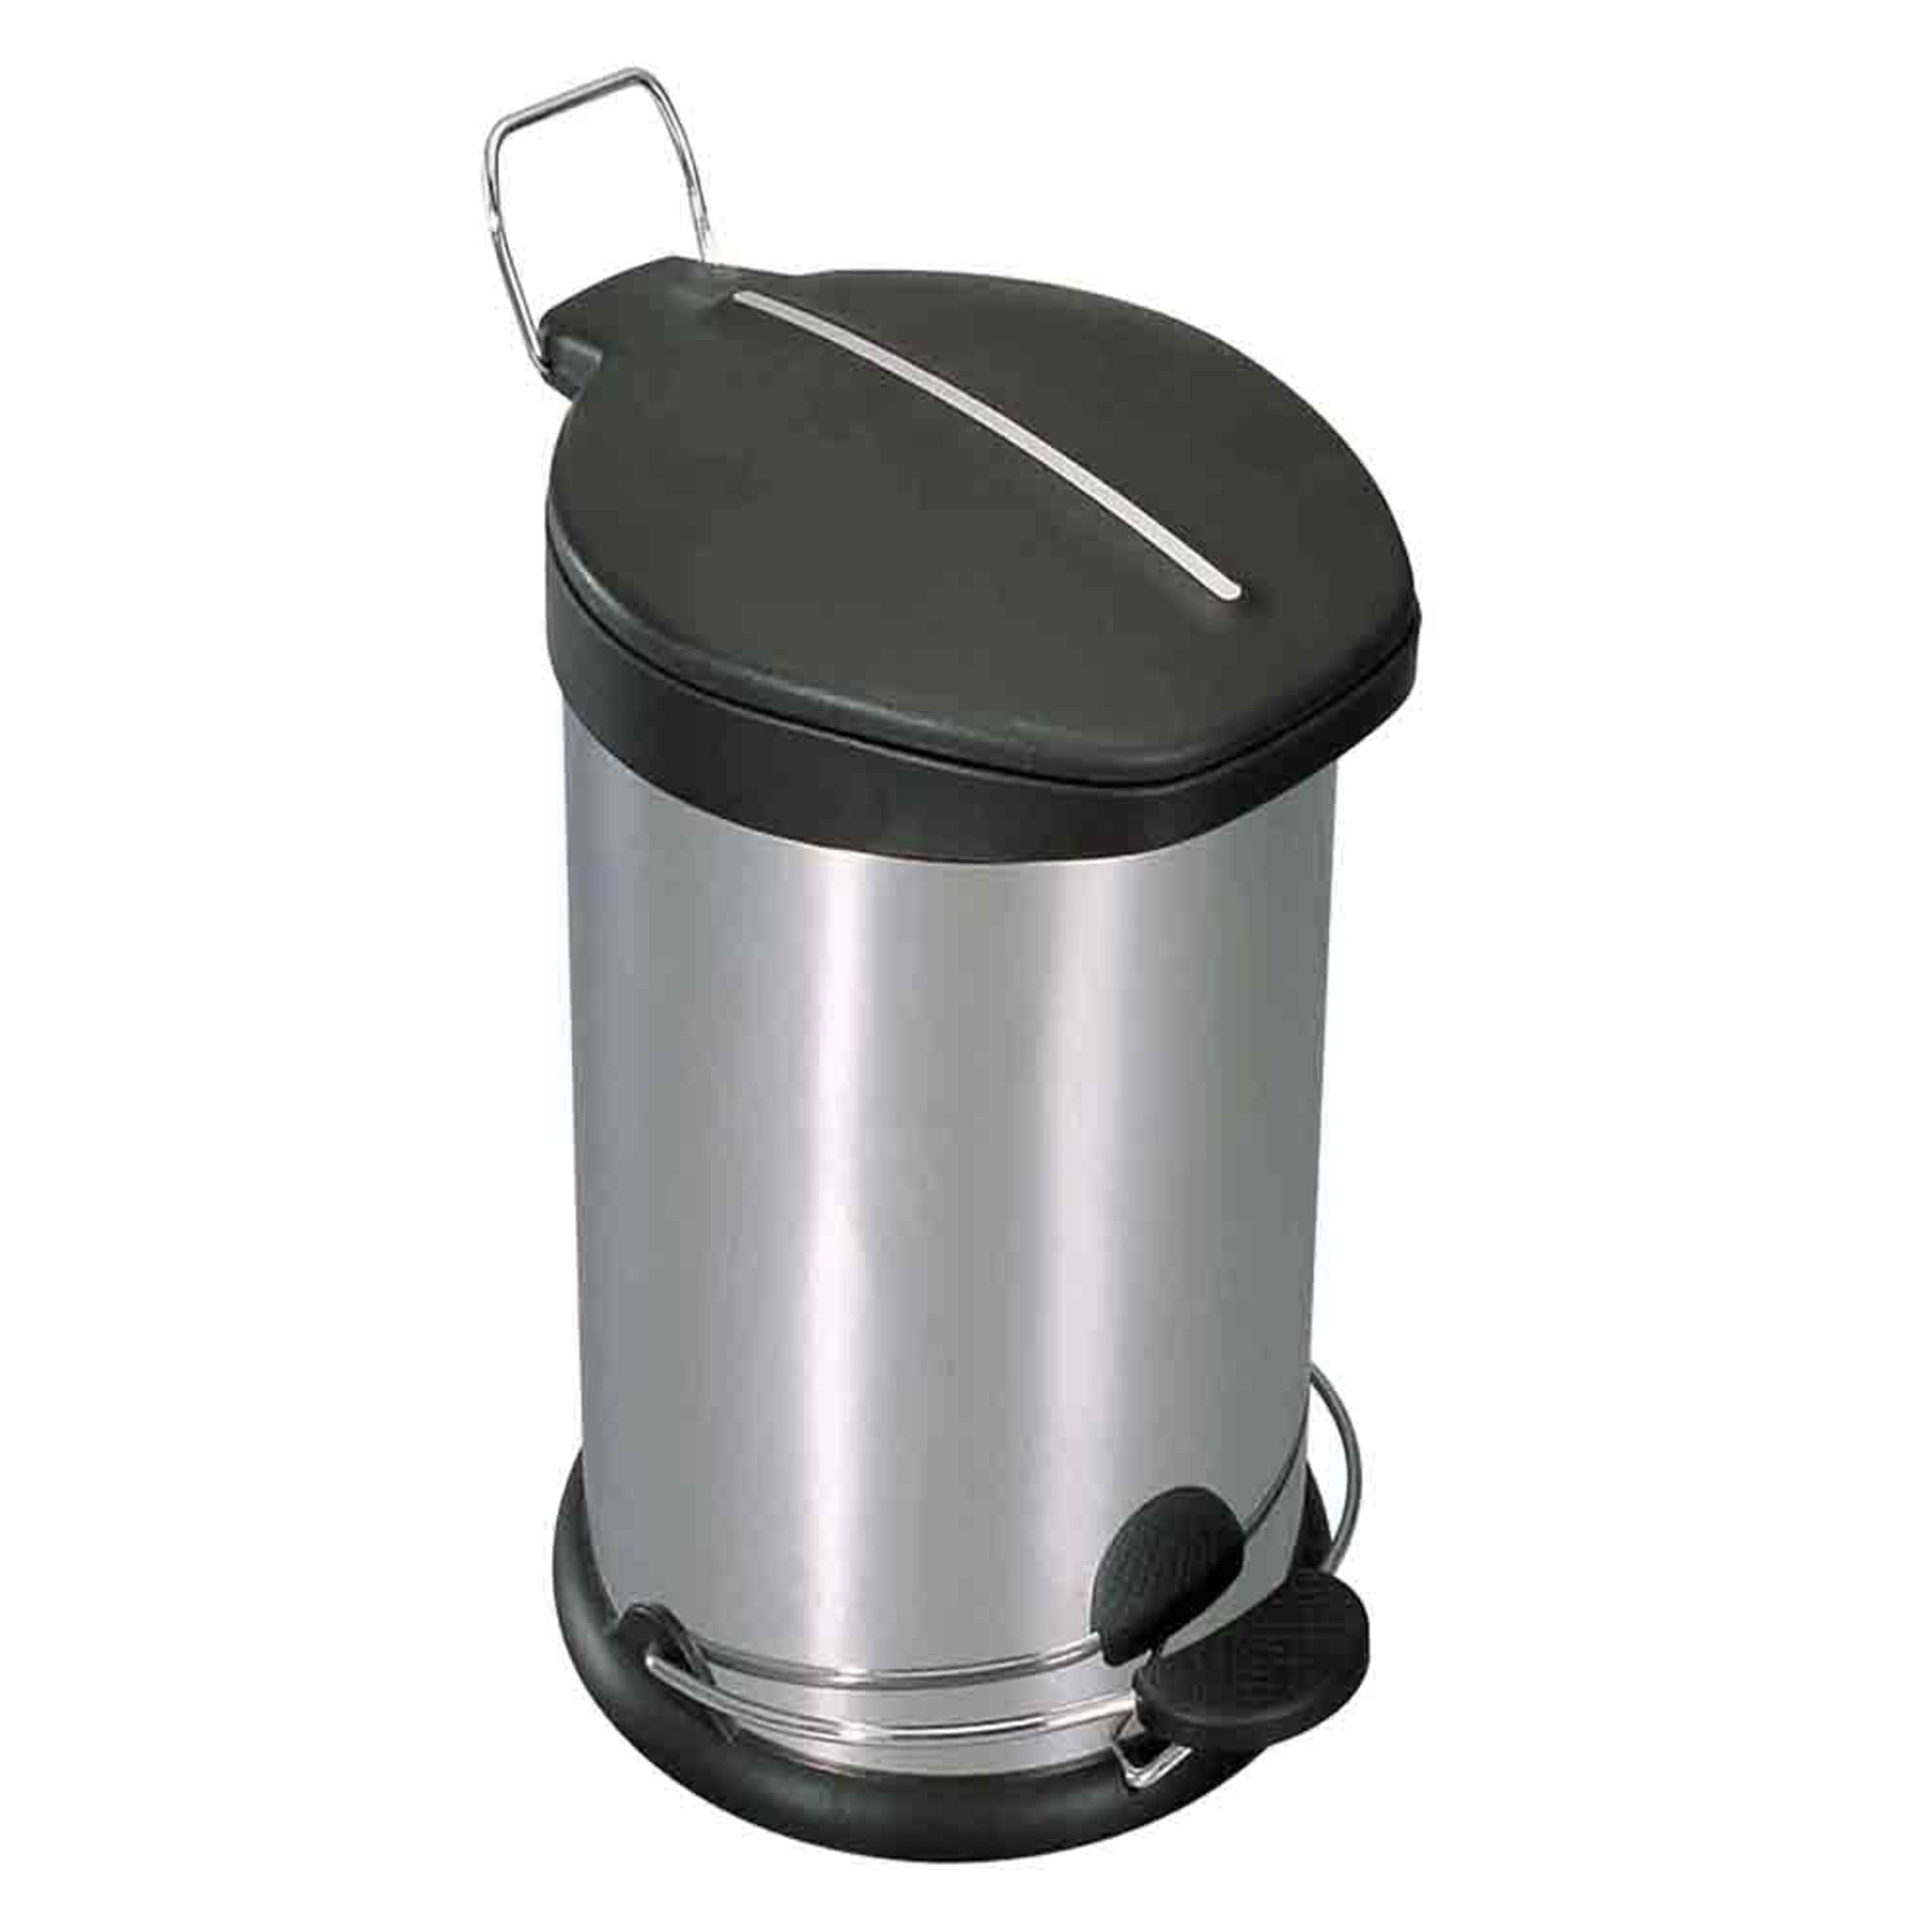 Home Basics 30 Liter Brushed Stainless Steel  with Plastic Top Waste Bin, Silver $40.00 EACH, CASE PACK OF 2